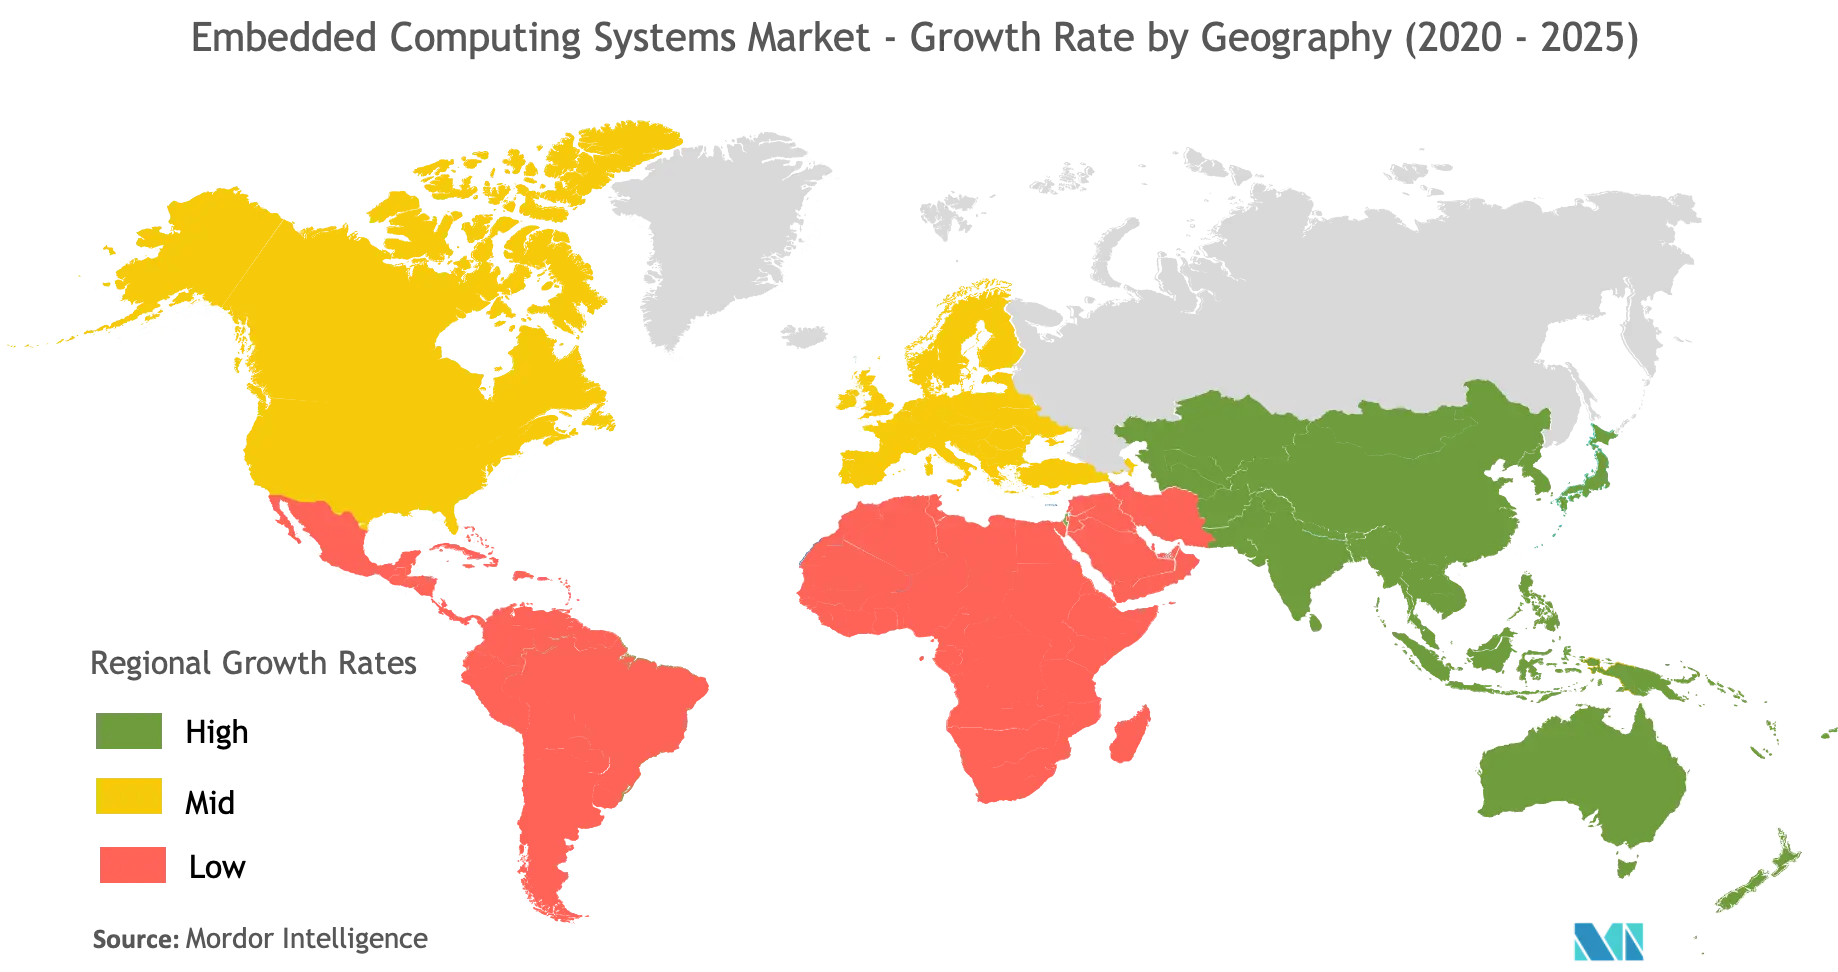 embedded computing systems market growth